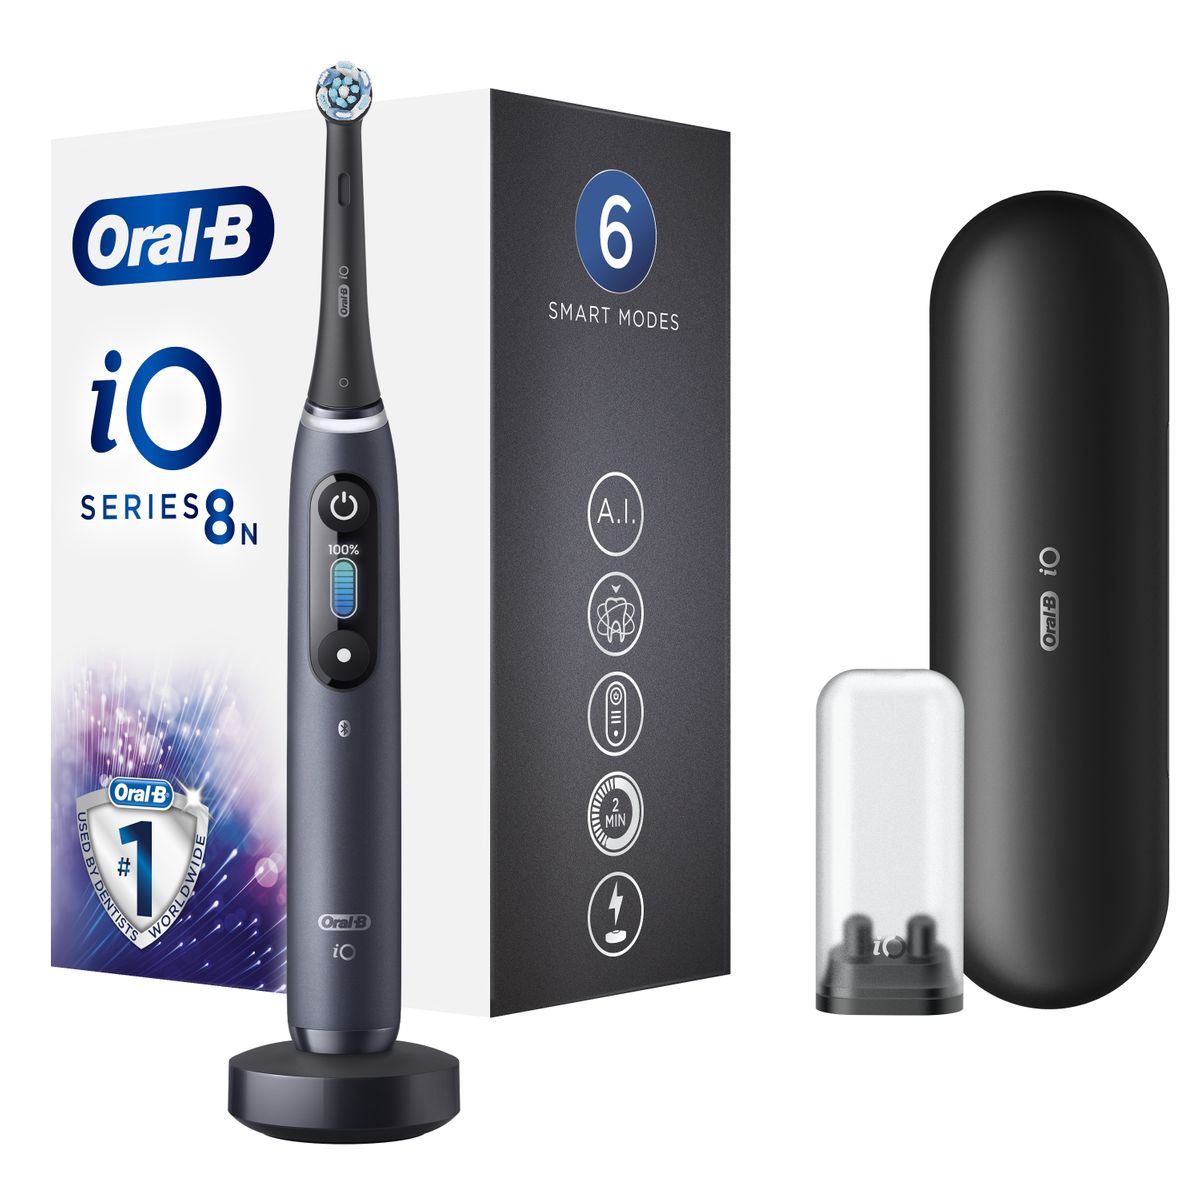 Oral-B iO 8n Go Electric Electric Toothbrush Professional Cleaning, Artificial Intelligence and Pressure Sensor